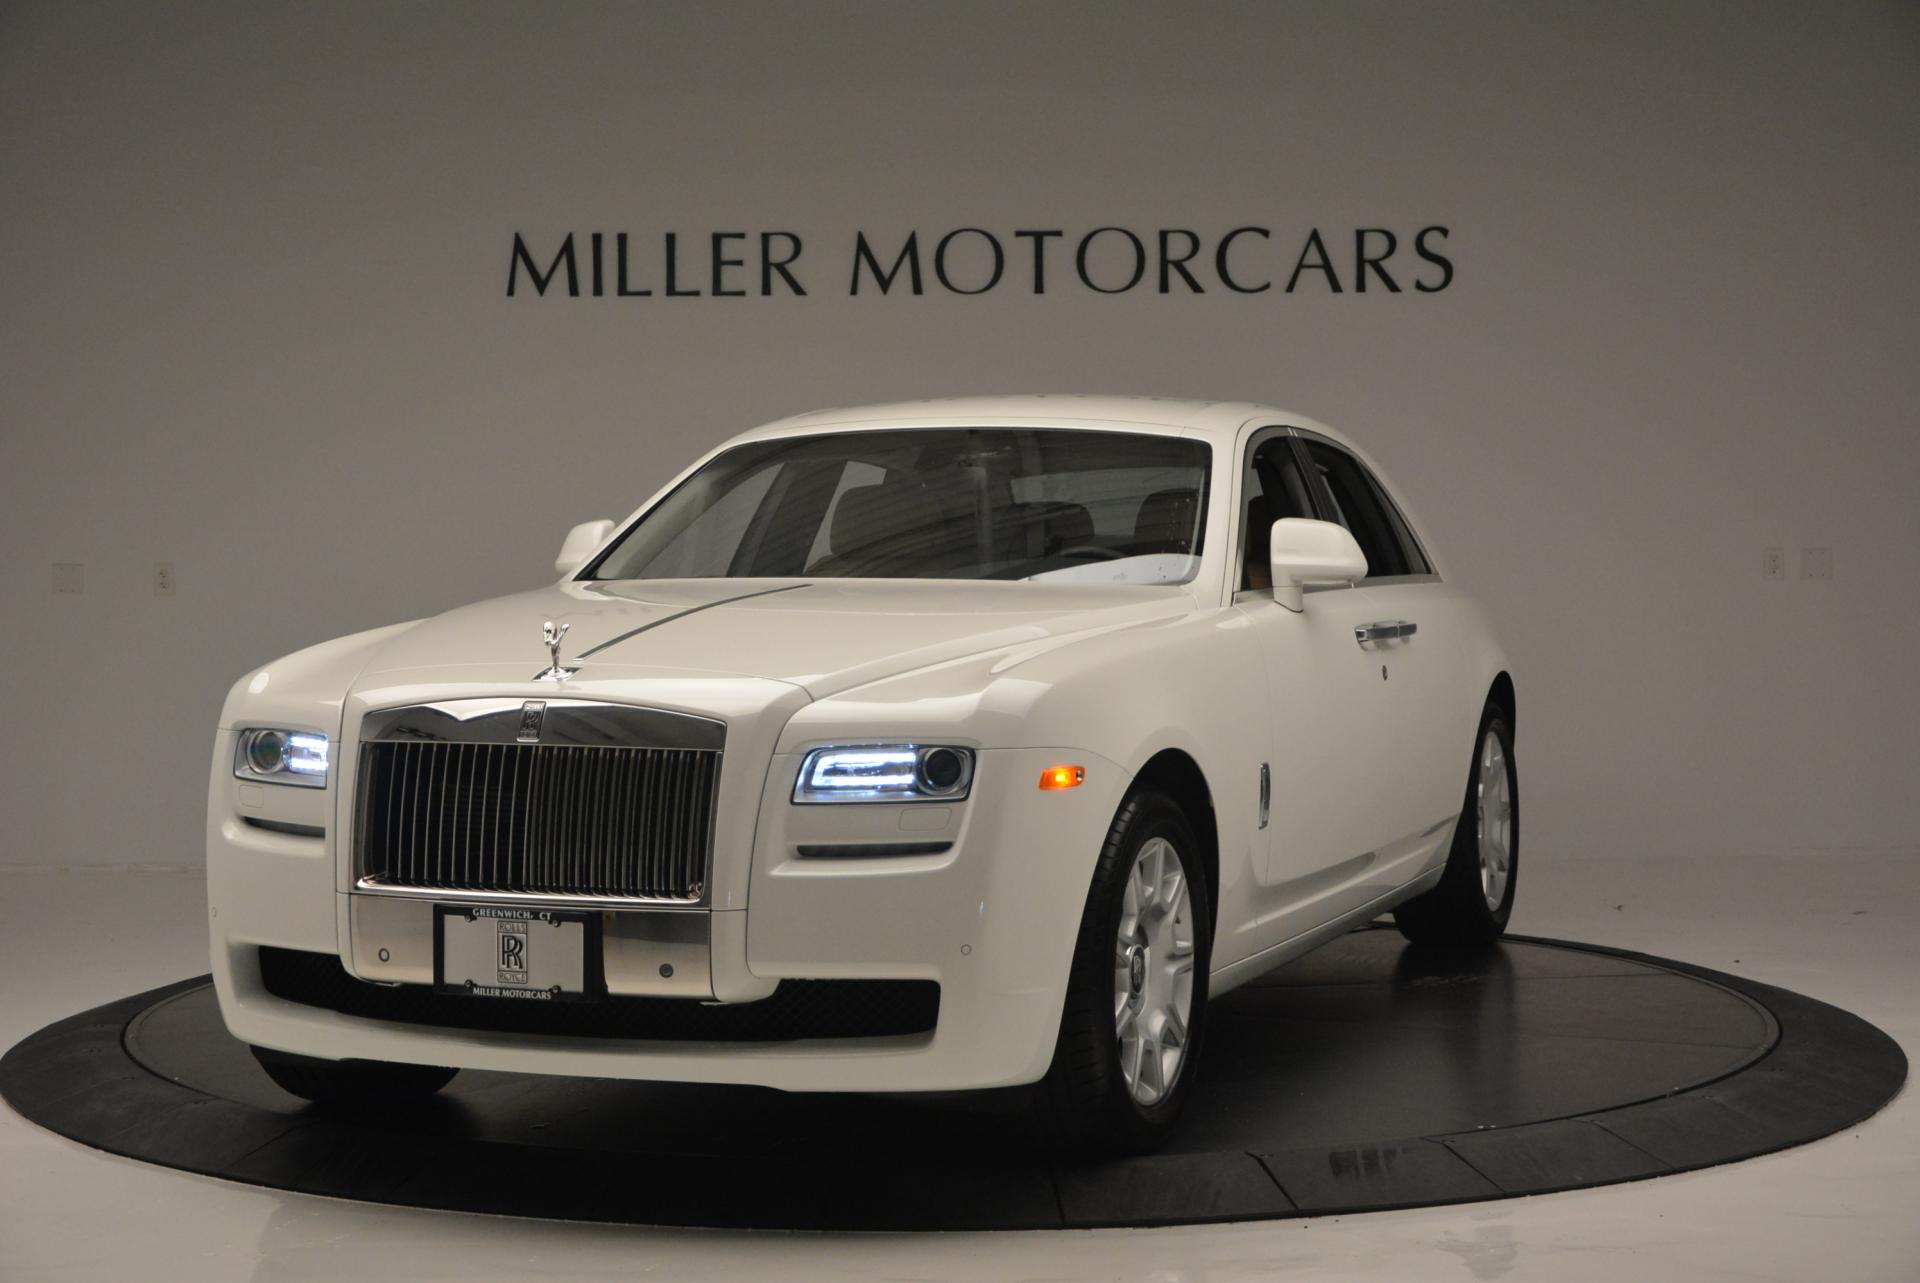 Used 2013 Rolls-Royce Ghost for sale Sold at Bentley Greenwich in Greenwich CT 06830 1